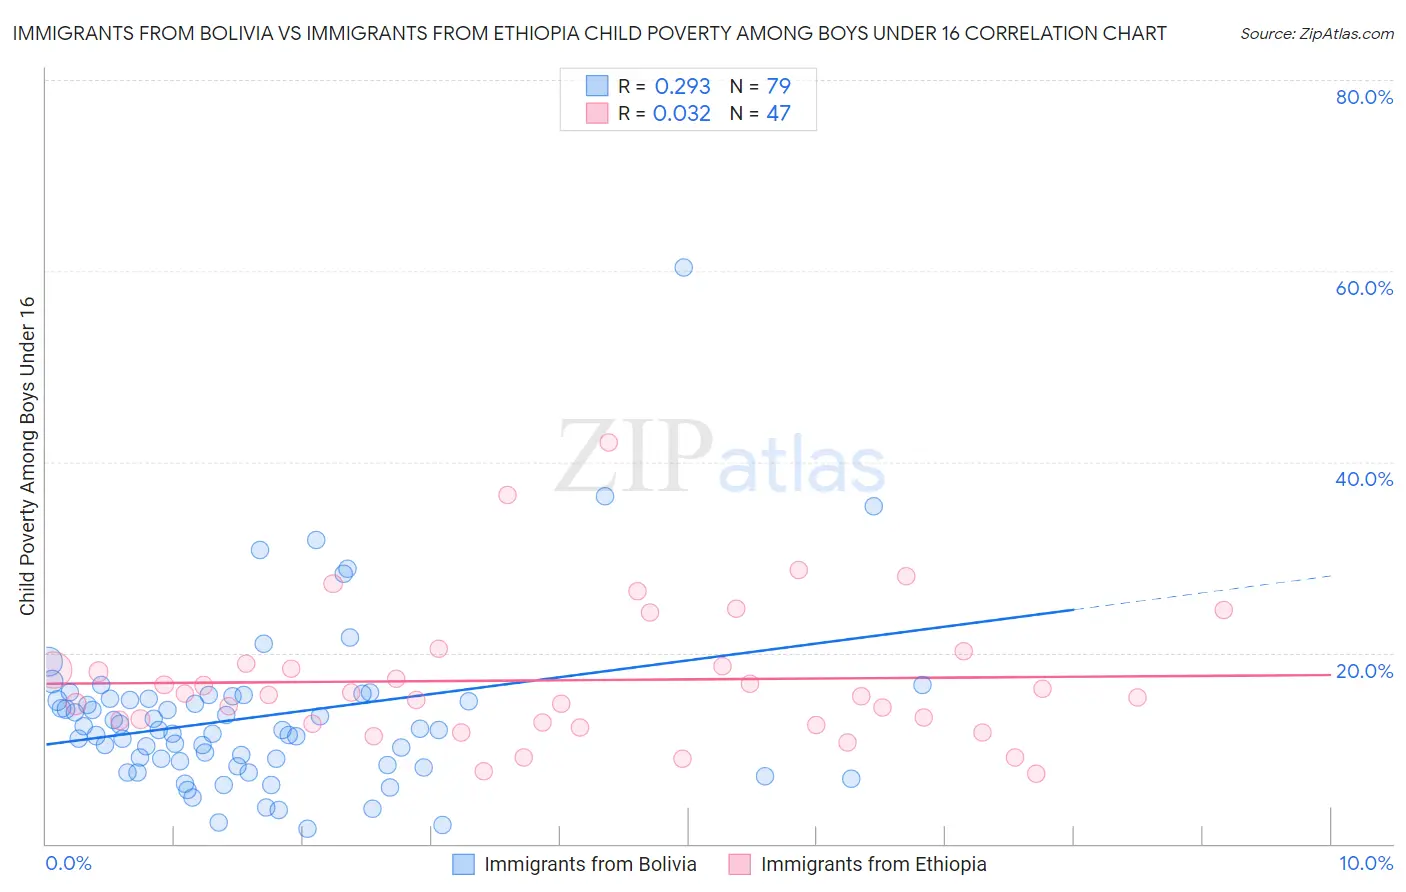 Immigrants from Bolivia vs Immigrants from Ethiopia Child Poverty Among Boys Under 16